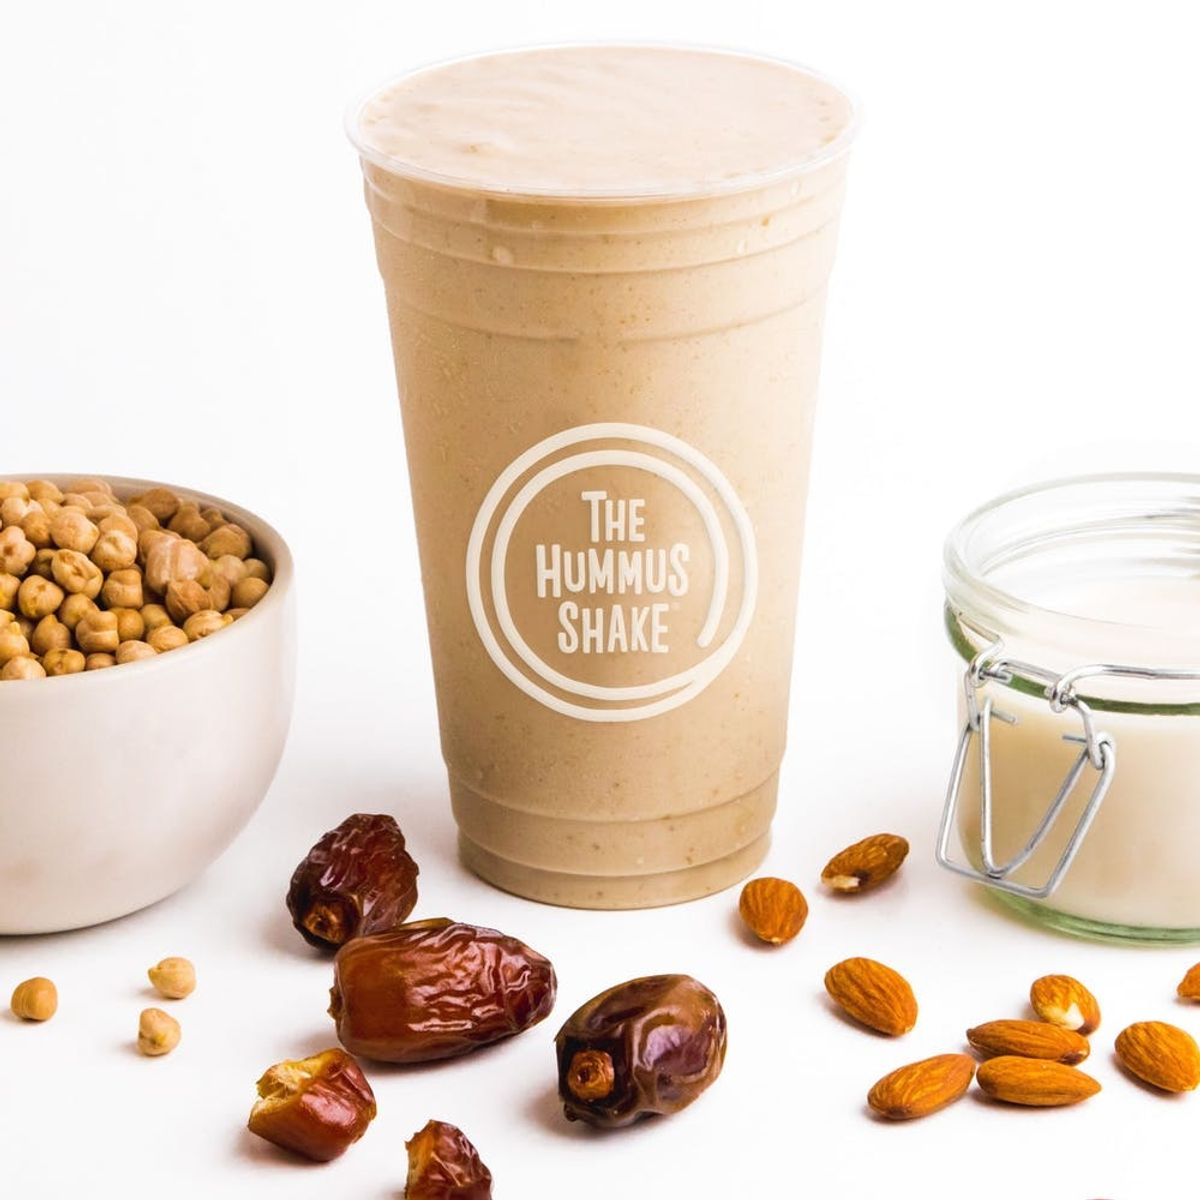 Hummus Shakes Are Now a Thing — and They Actually Taste Good!